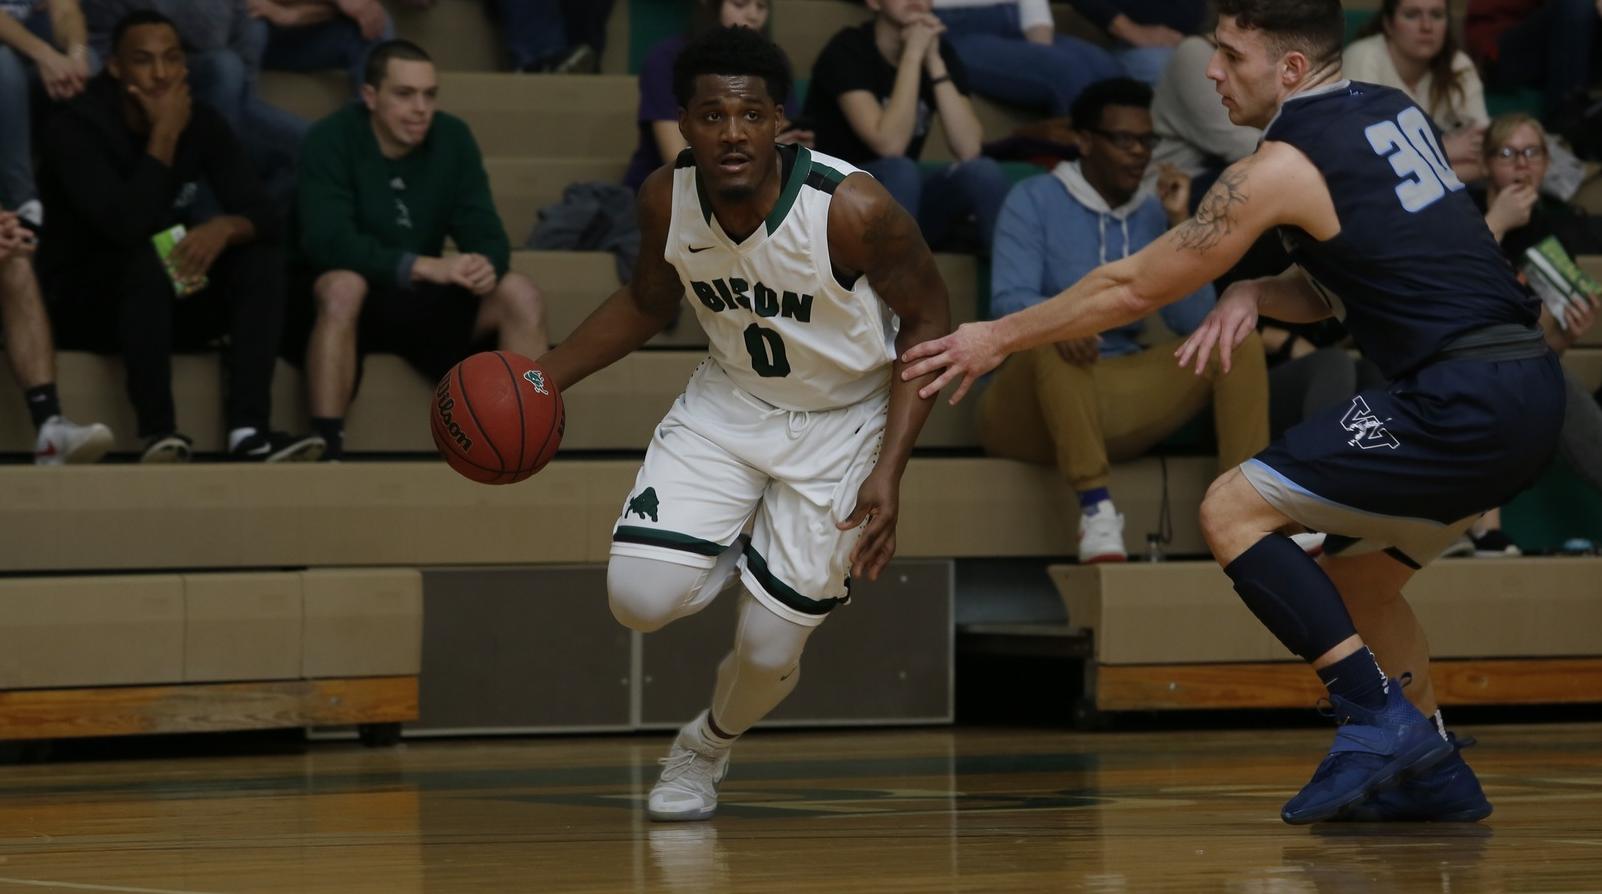 Bison rally past Westminster in PAC Semifinals, 76-72